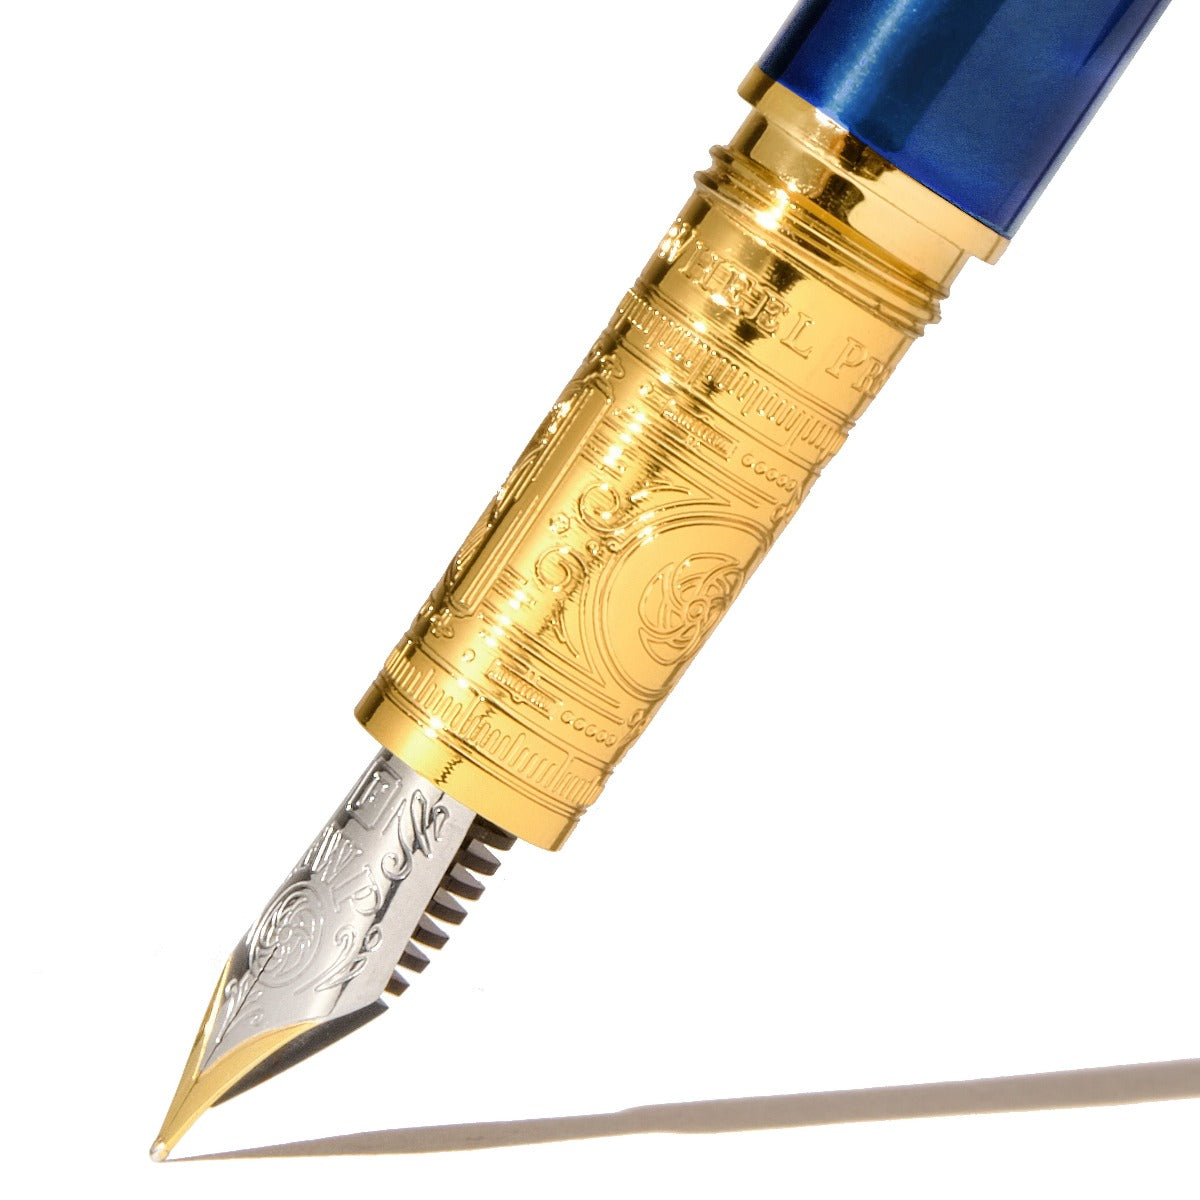 Close-up of a finely engraved gold and silver fountain pen nib. Wordkind.